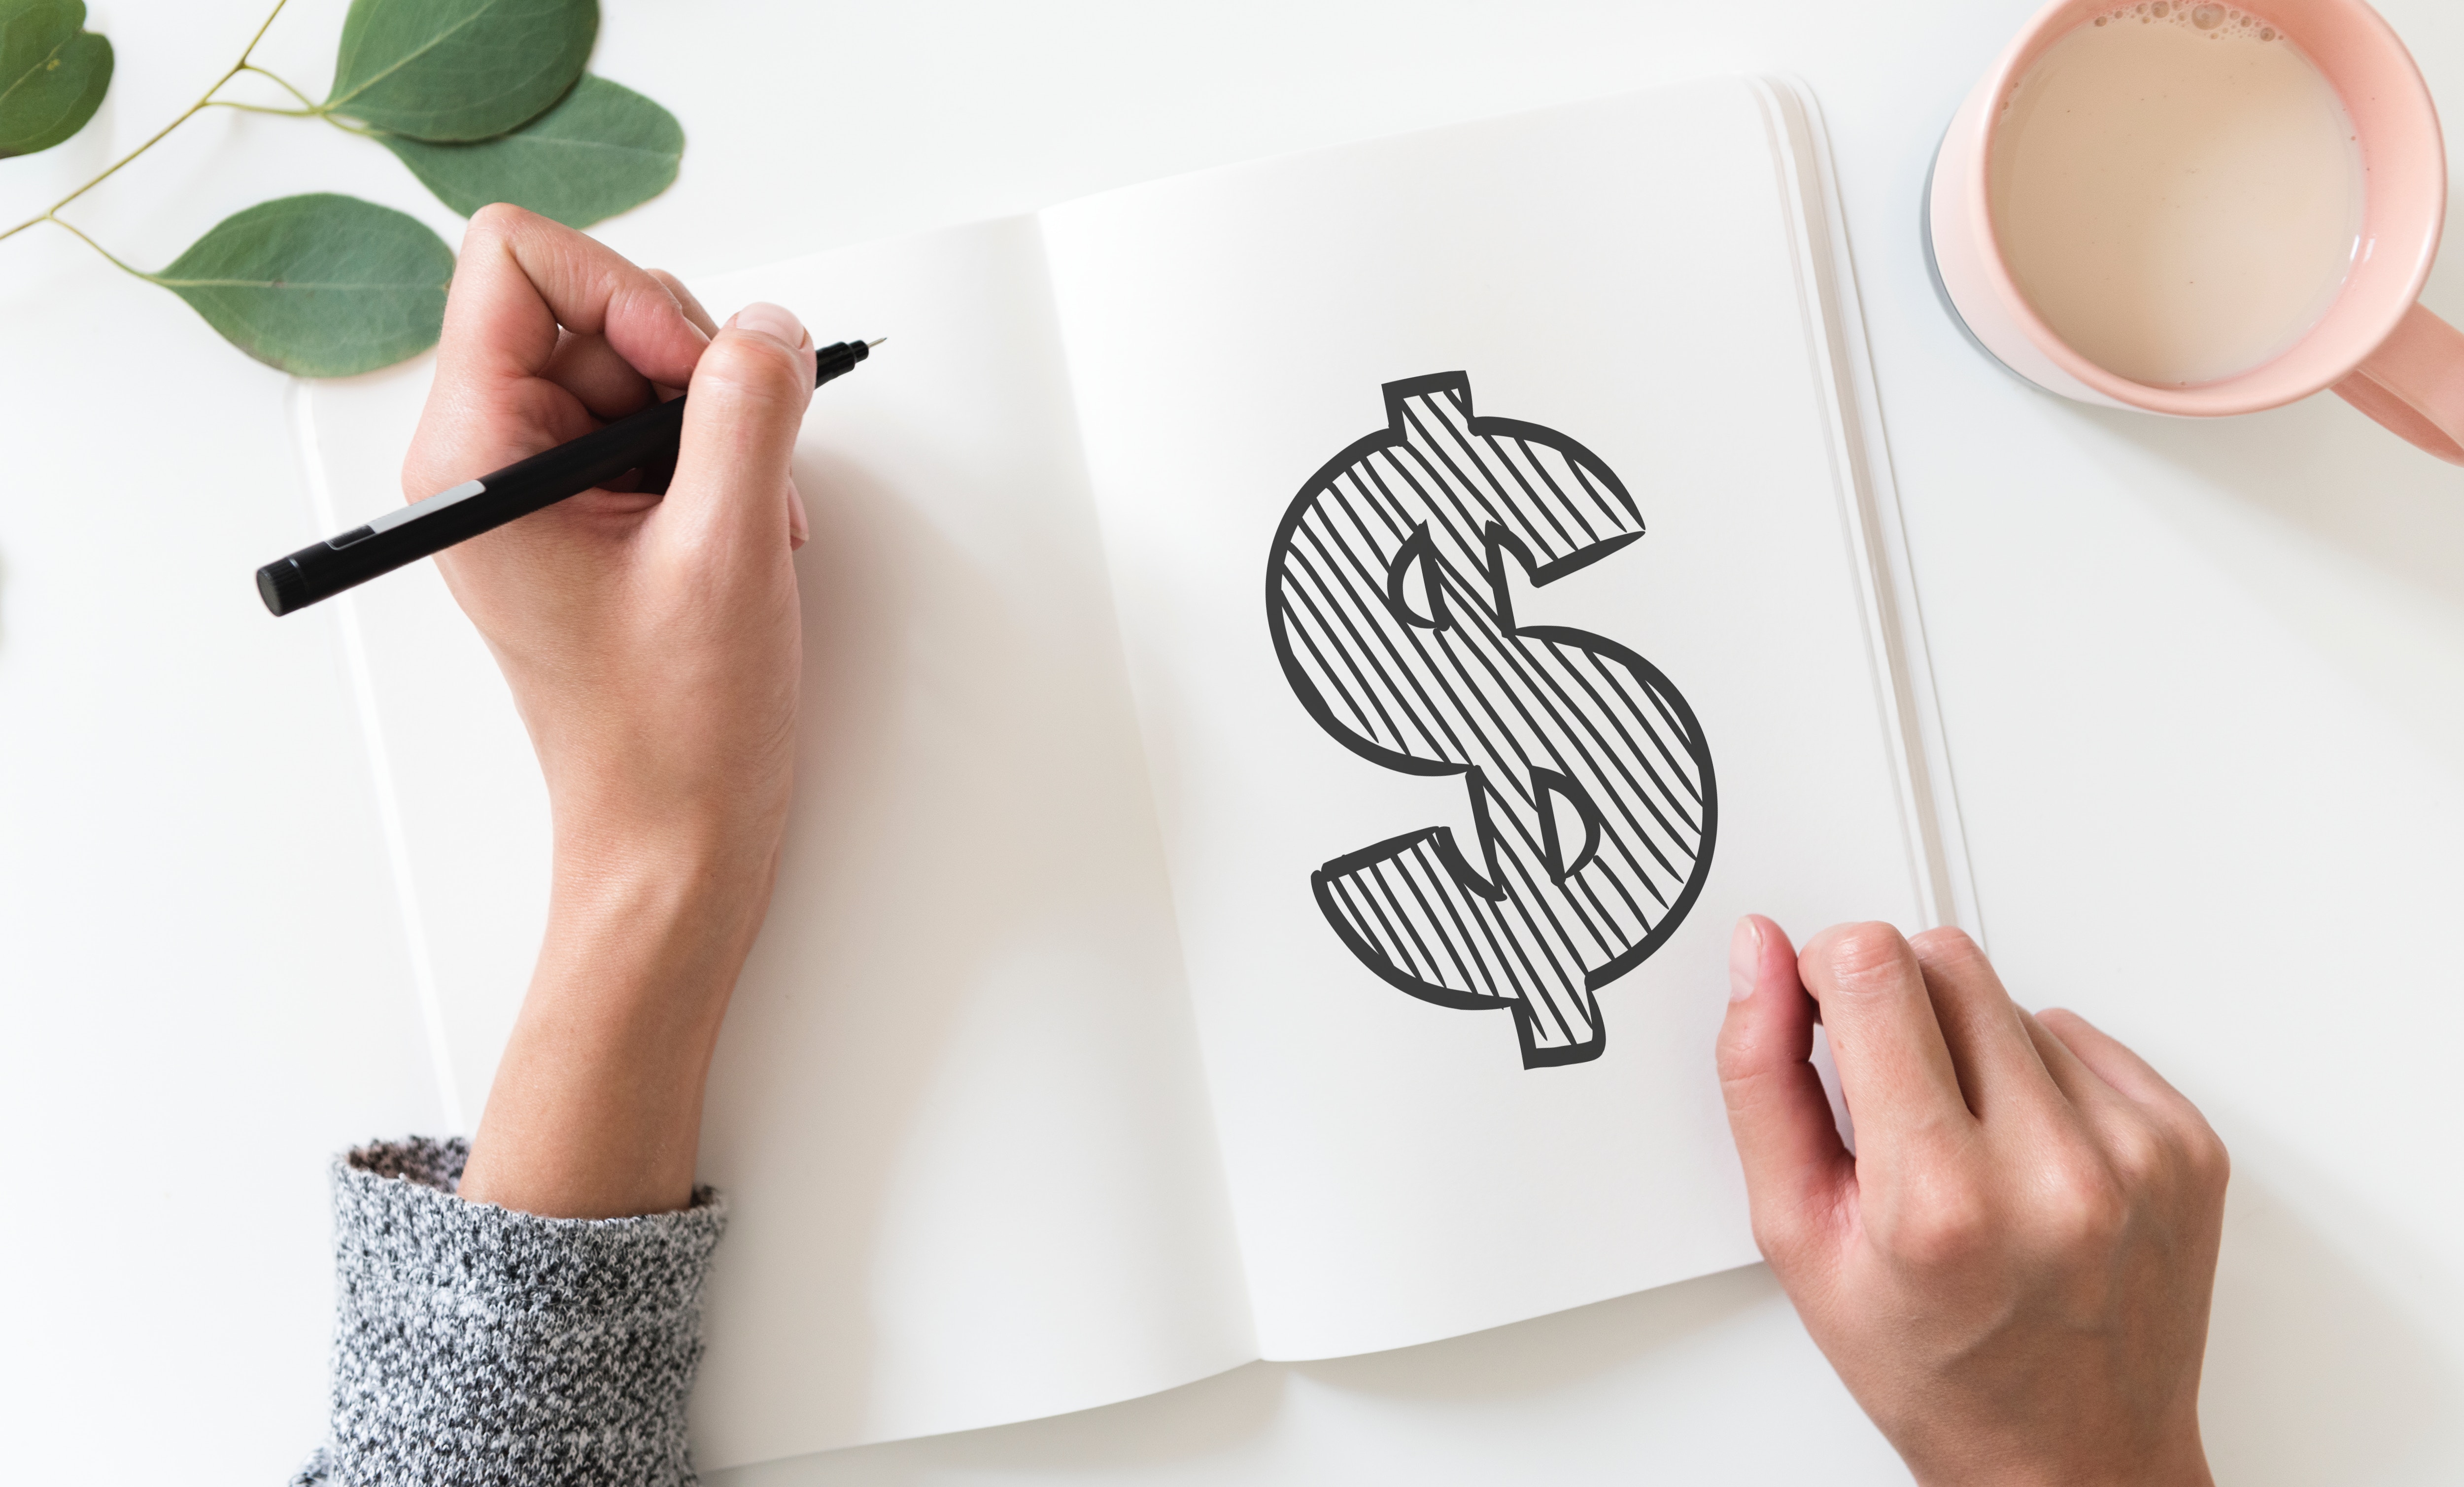 person with pen in hand drawing a dollar sign Photo by rawpixel on Unsplash